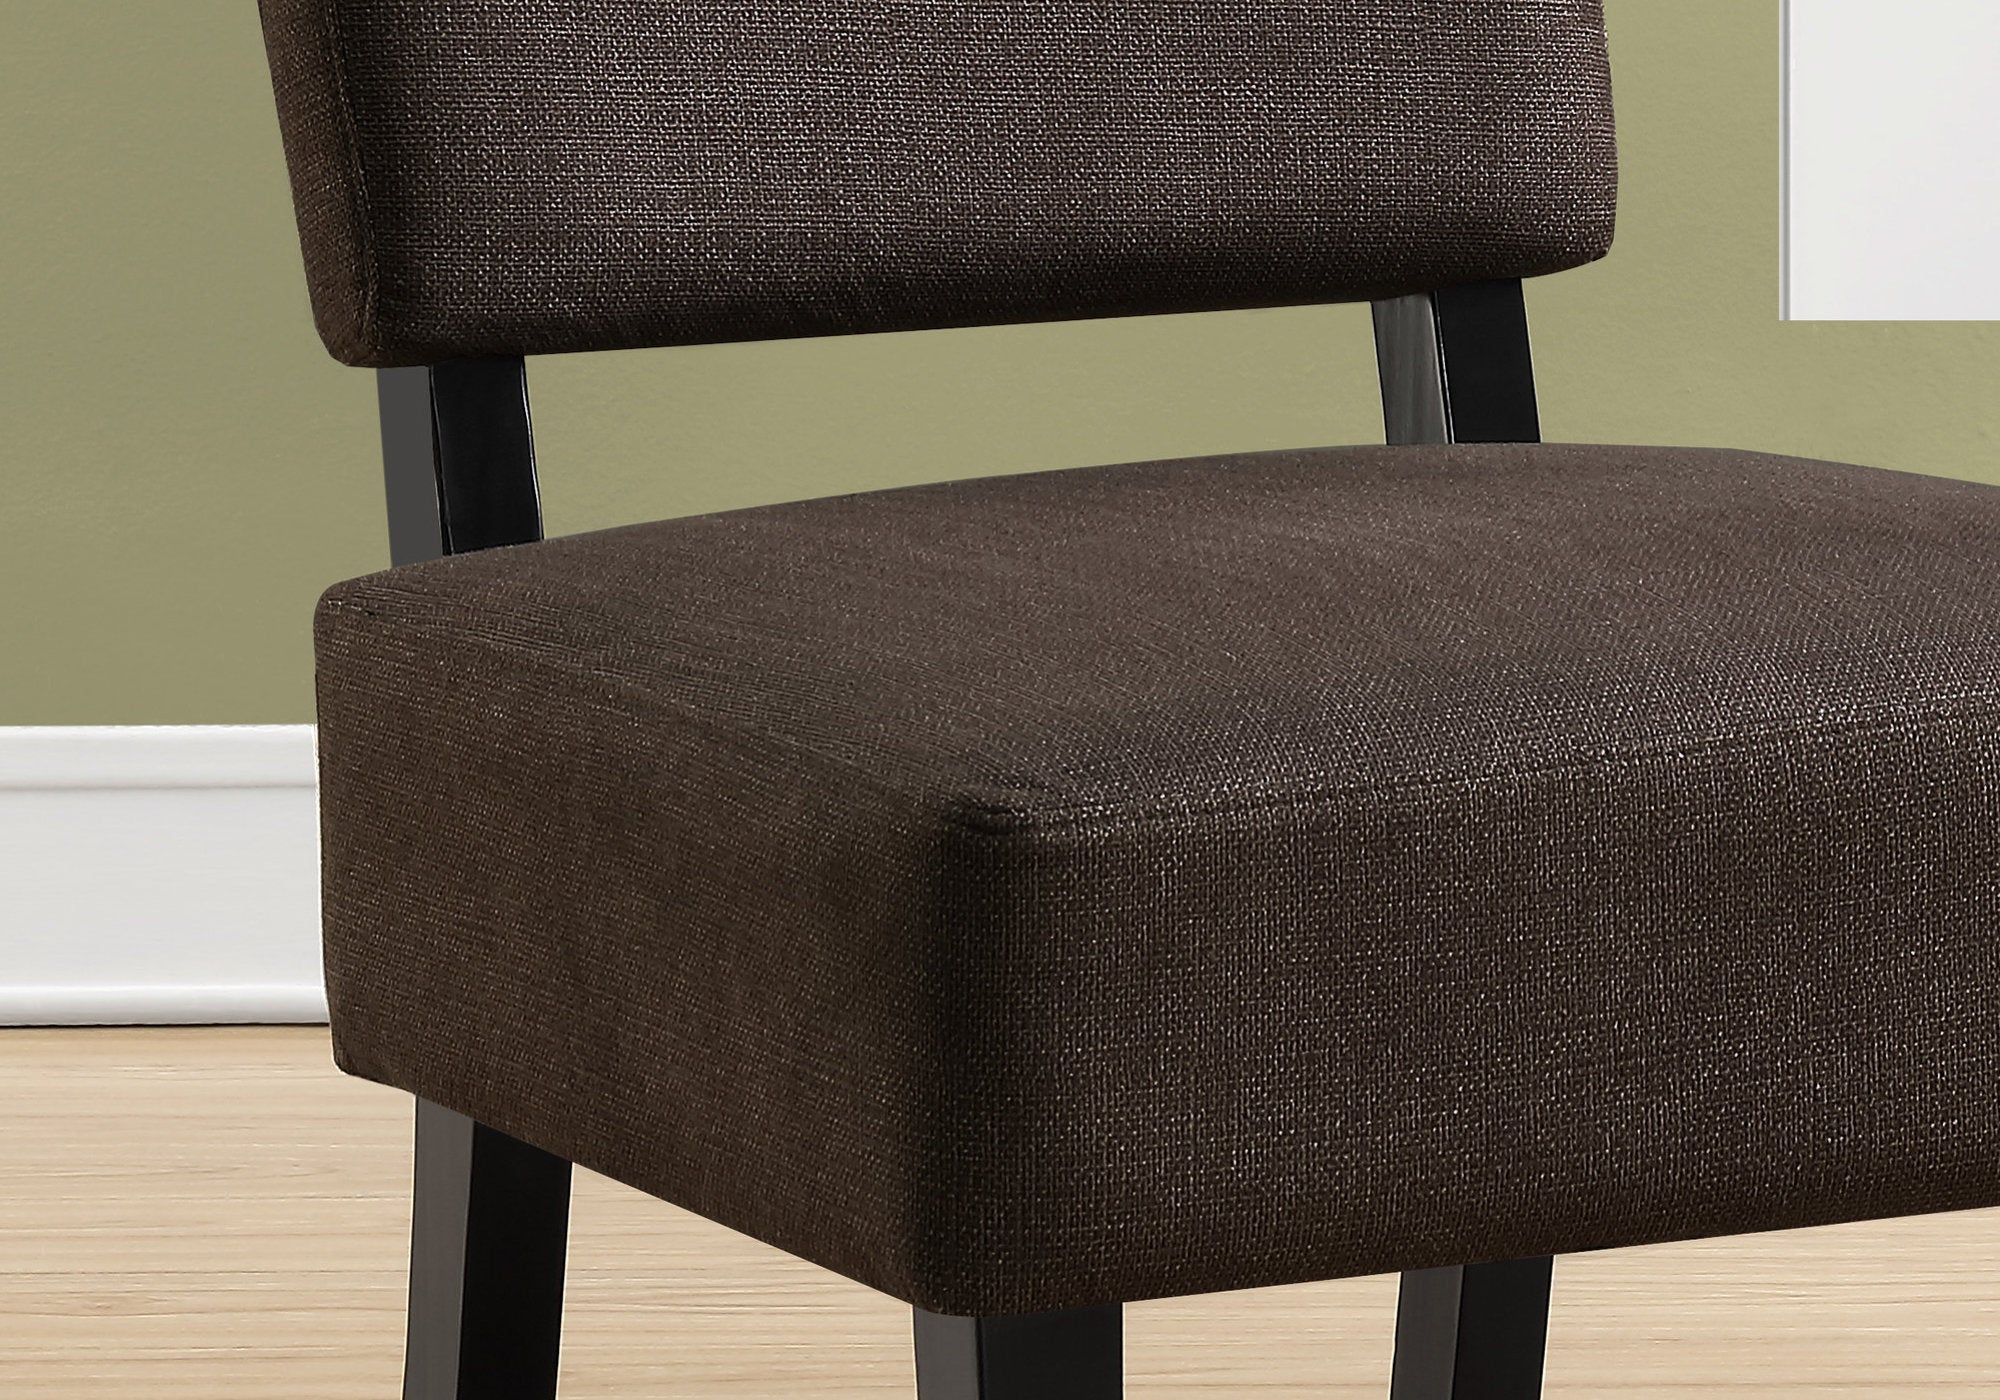 32" Dark Grey Accent Chair with Solid Wood Frame